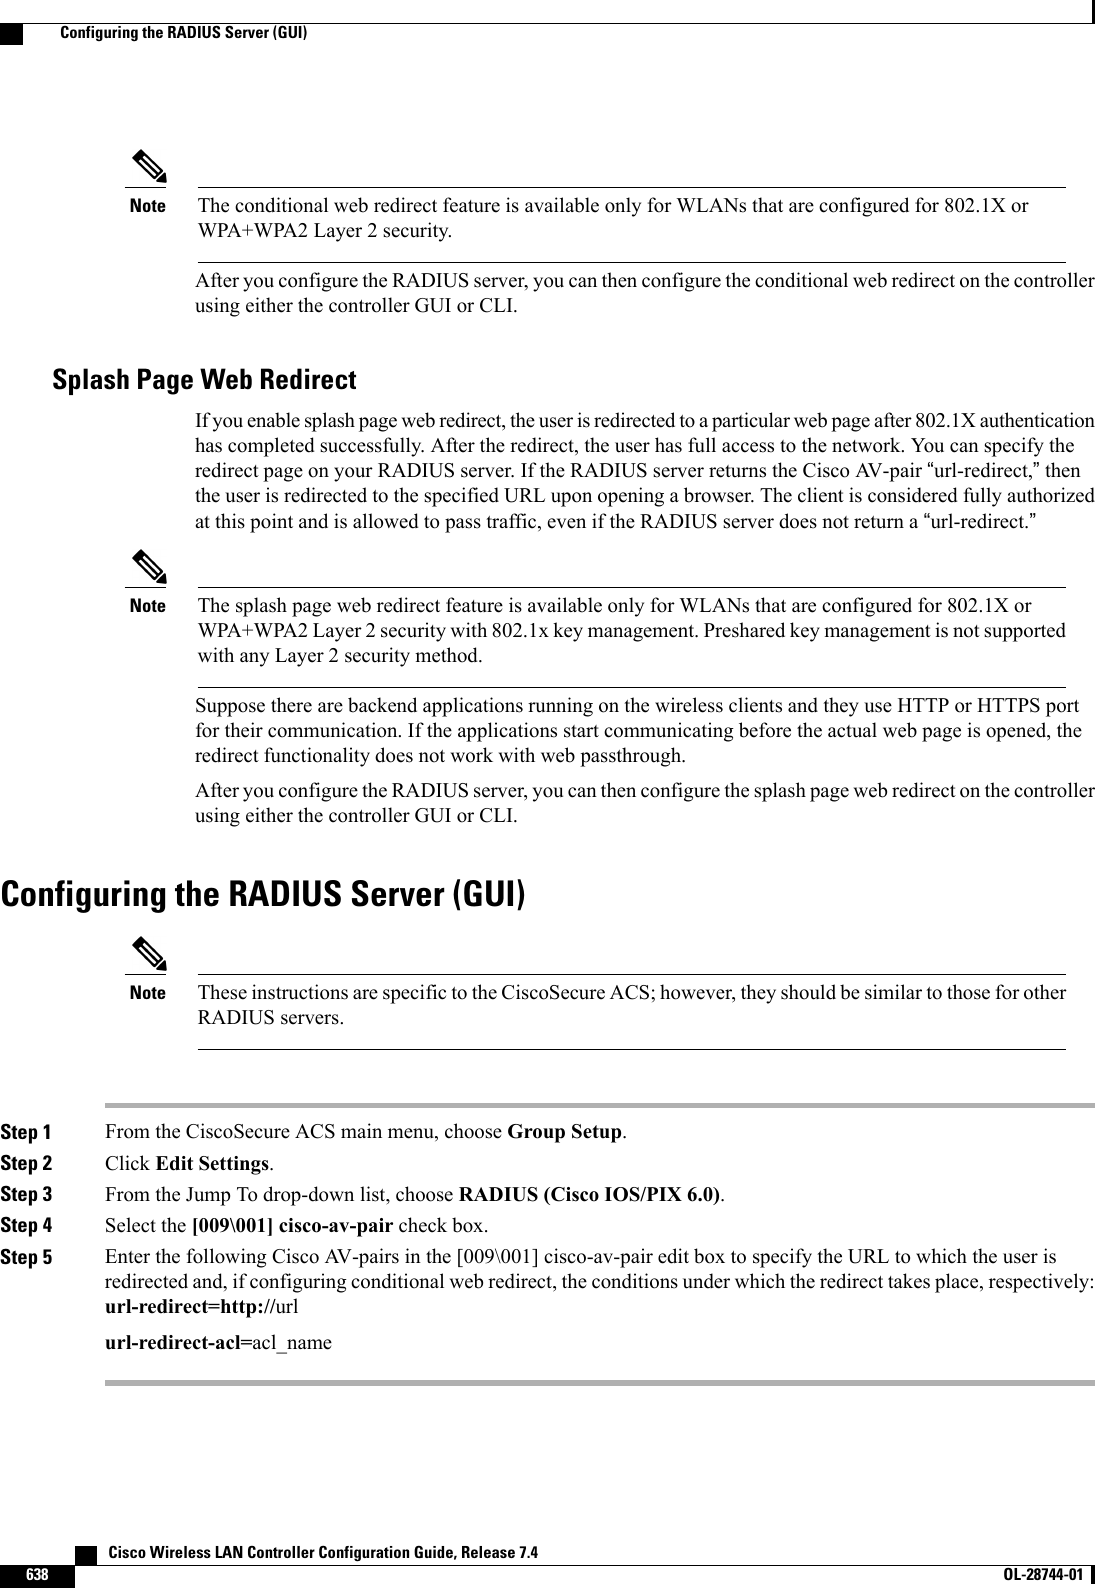 The conditional web redirect feature is available only for WLANs that are configured for 802.1X orWPA+WPA2 Layer 2 security.NoteAfter you configure the RADIUS server, you can then configure the conditional web redirect on the controllerusing either the controller GUI or CLI.Splash Page Web RedirectIf you enable splash page web redirect, the user is redirected to a particular web page after 802.1X authenticationhas completed successfully. After the redirect, the user has full access to the network. You can specify theredirect page on your RADIUS server. If the RADIUS server returns the Cisco AV-pair “url-redirect,”thenthe user is redirected to the specified URL upon opening a browser. The client is considered fully authorizedat this point and is allowed to pass traffic, even if the RADIUS server does not return a “url-redirect.”The splash page web redirect feature is available only for WLANs that are configured for 802.1X orWPA+WPA2 Layer 2 security with 802.1x key management. Preshared key management is not supportedwith any Layer 2 security method.NoteSuppose there are backend applications running on the wireless clients and they use HTTP or HTTPS portfor their communication. If the applications start communicating before the actual web page is opened, theredirect functionality does not work with web passthrough.After you configure the RADIUS server, you can then configure the splash page web redirect on the controllerusing either the controller GUI or CLI.Configuring the RADIUS Server (GUI)These instructions are specific to the CiscoSecure ACS; however, they should be similar to those for otherRADIUS servers.NoteStep 1 From the CiscoSecure ACS main menu, choose Group Setup.Step 2 Click Edit Settings.Step 3 From the Jump To drop-down list, choose RADIUS (Cisco IOS/PIX 6.0).Step 4 Select the [009\001] cisco-av-pair check box.Step 5 Enter the following Cisco AV-pairs in the [009\001] cisco-av-pair edit box to specify the URL to which the user isredirected and, if configuring conditional web redirect, the conditions under which the redirect takes place, respectively:url-redirect=http://urlurl-redirect-acl=acl_name   Cisco Wireless LAN Controller Configuration Guide, Release 7.4638 OL-28744-01  Configuring the RADIUS Server (GUI)